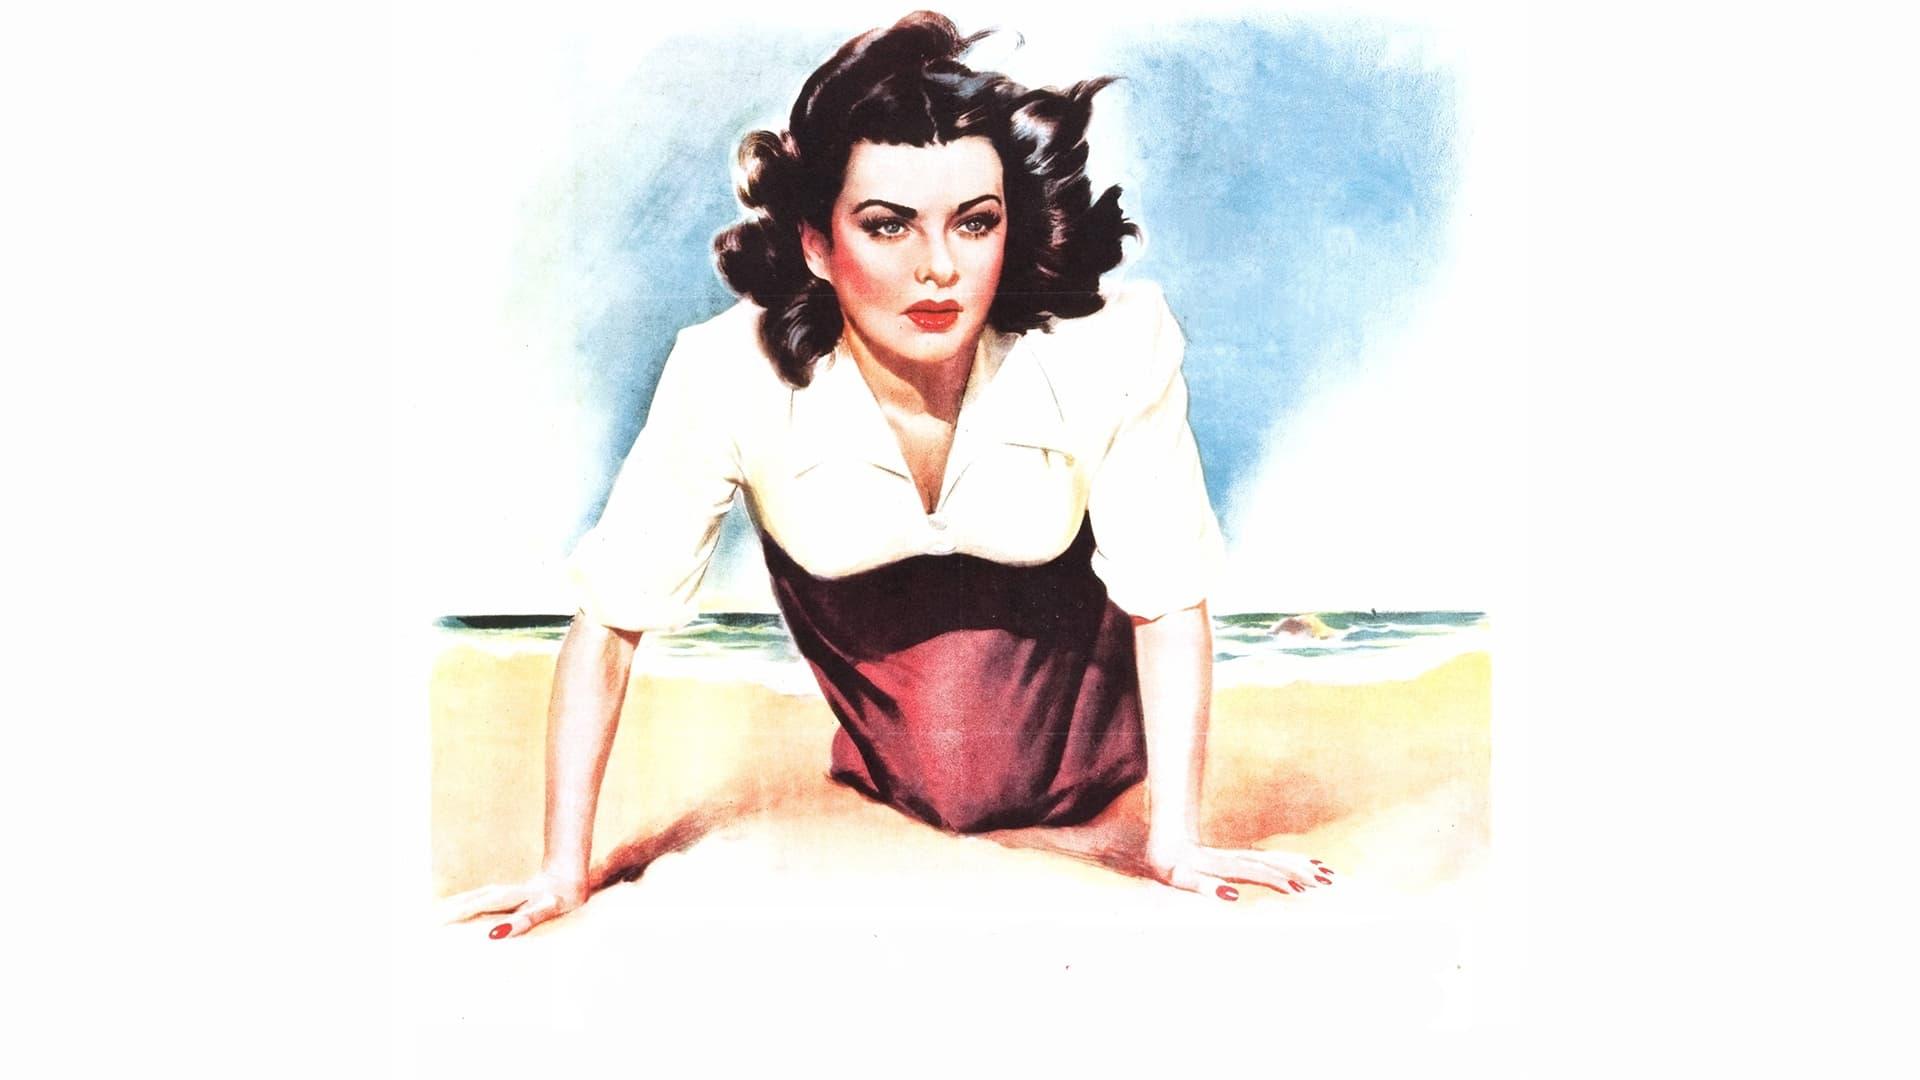 The Woman on the Beach backdrop